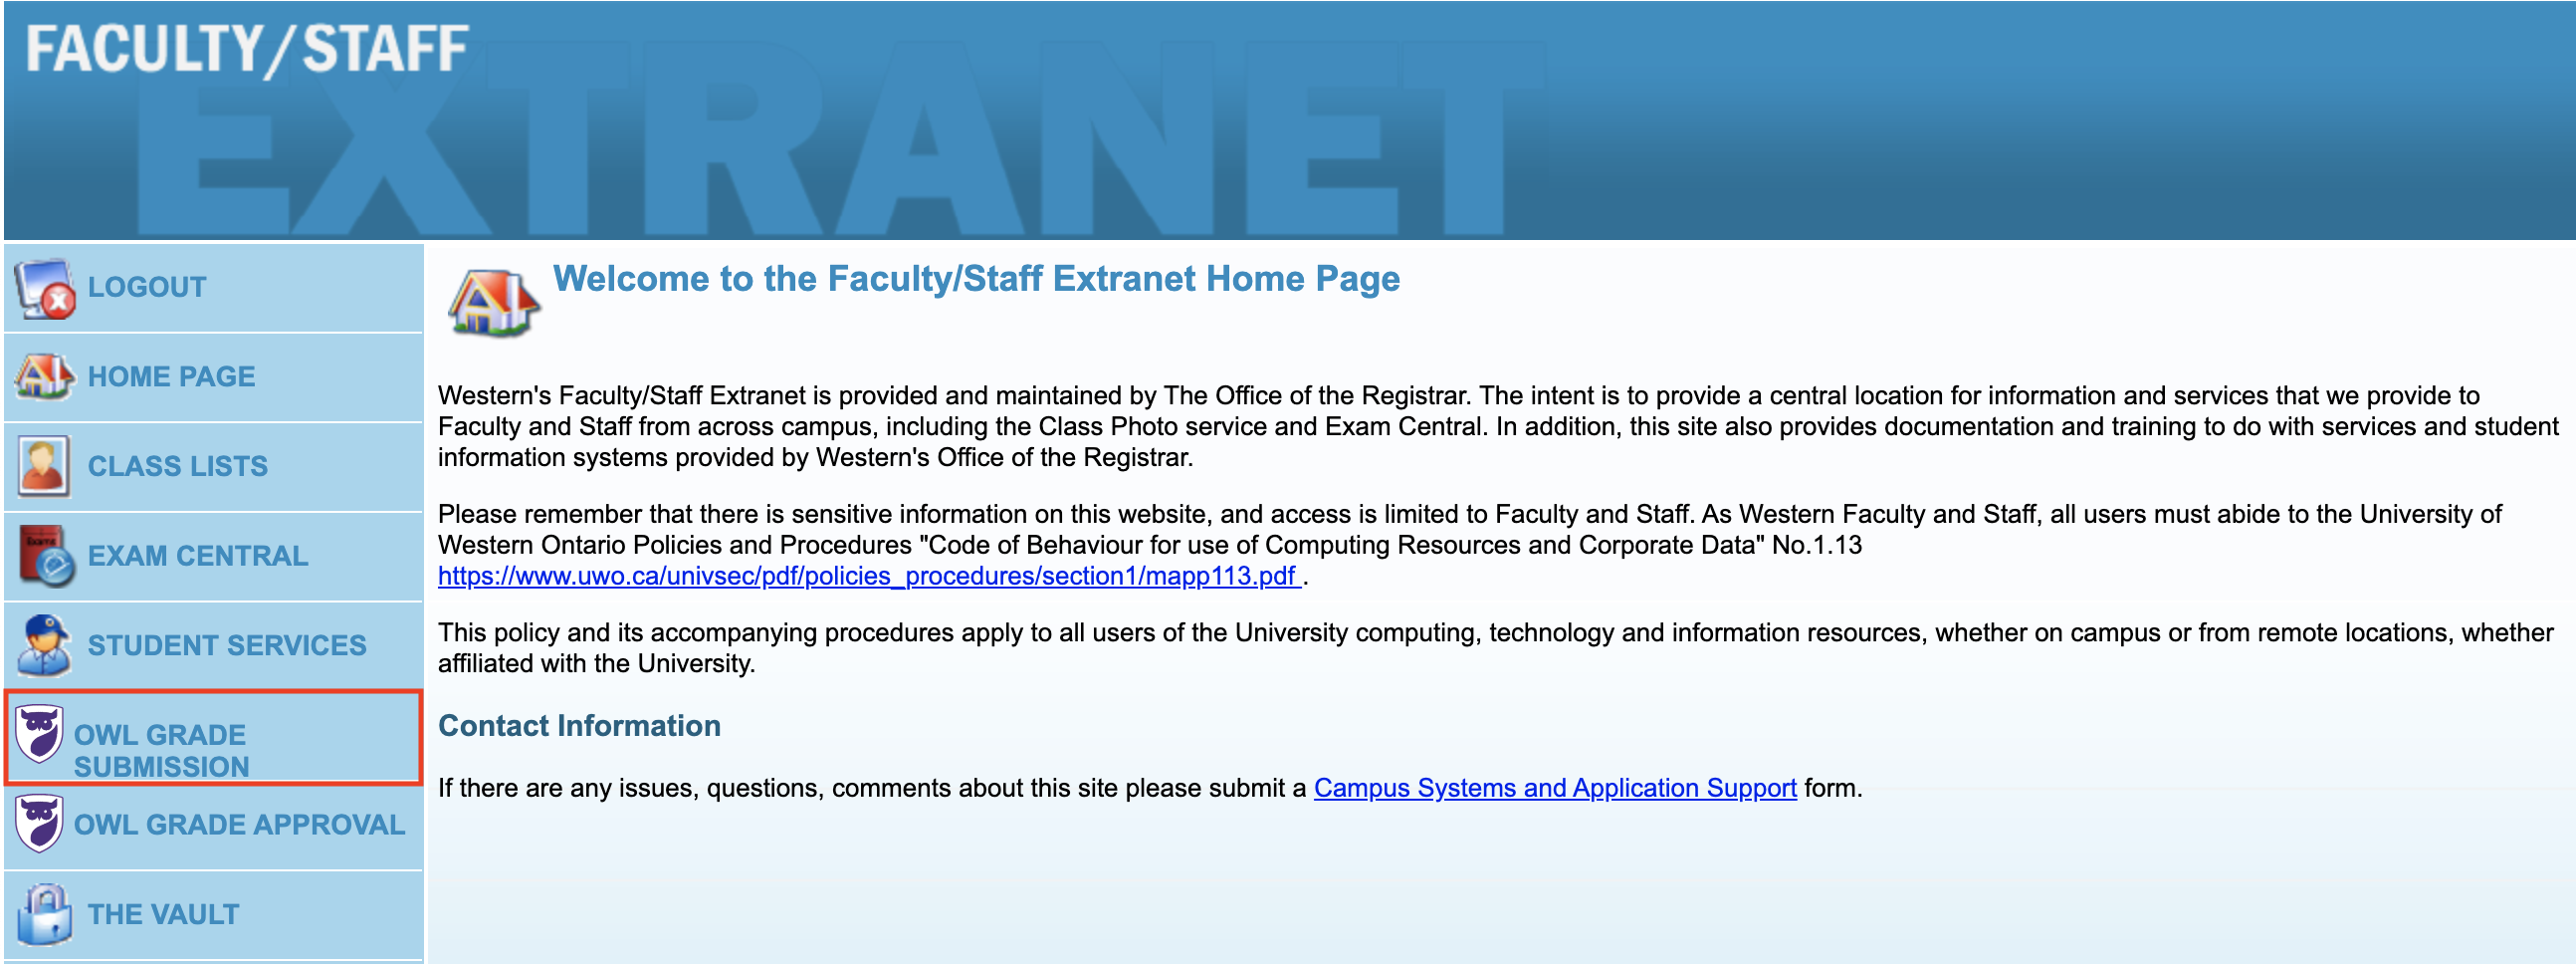 Extranet-Homepage.png